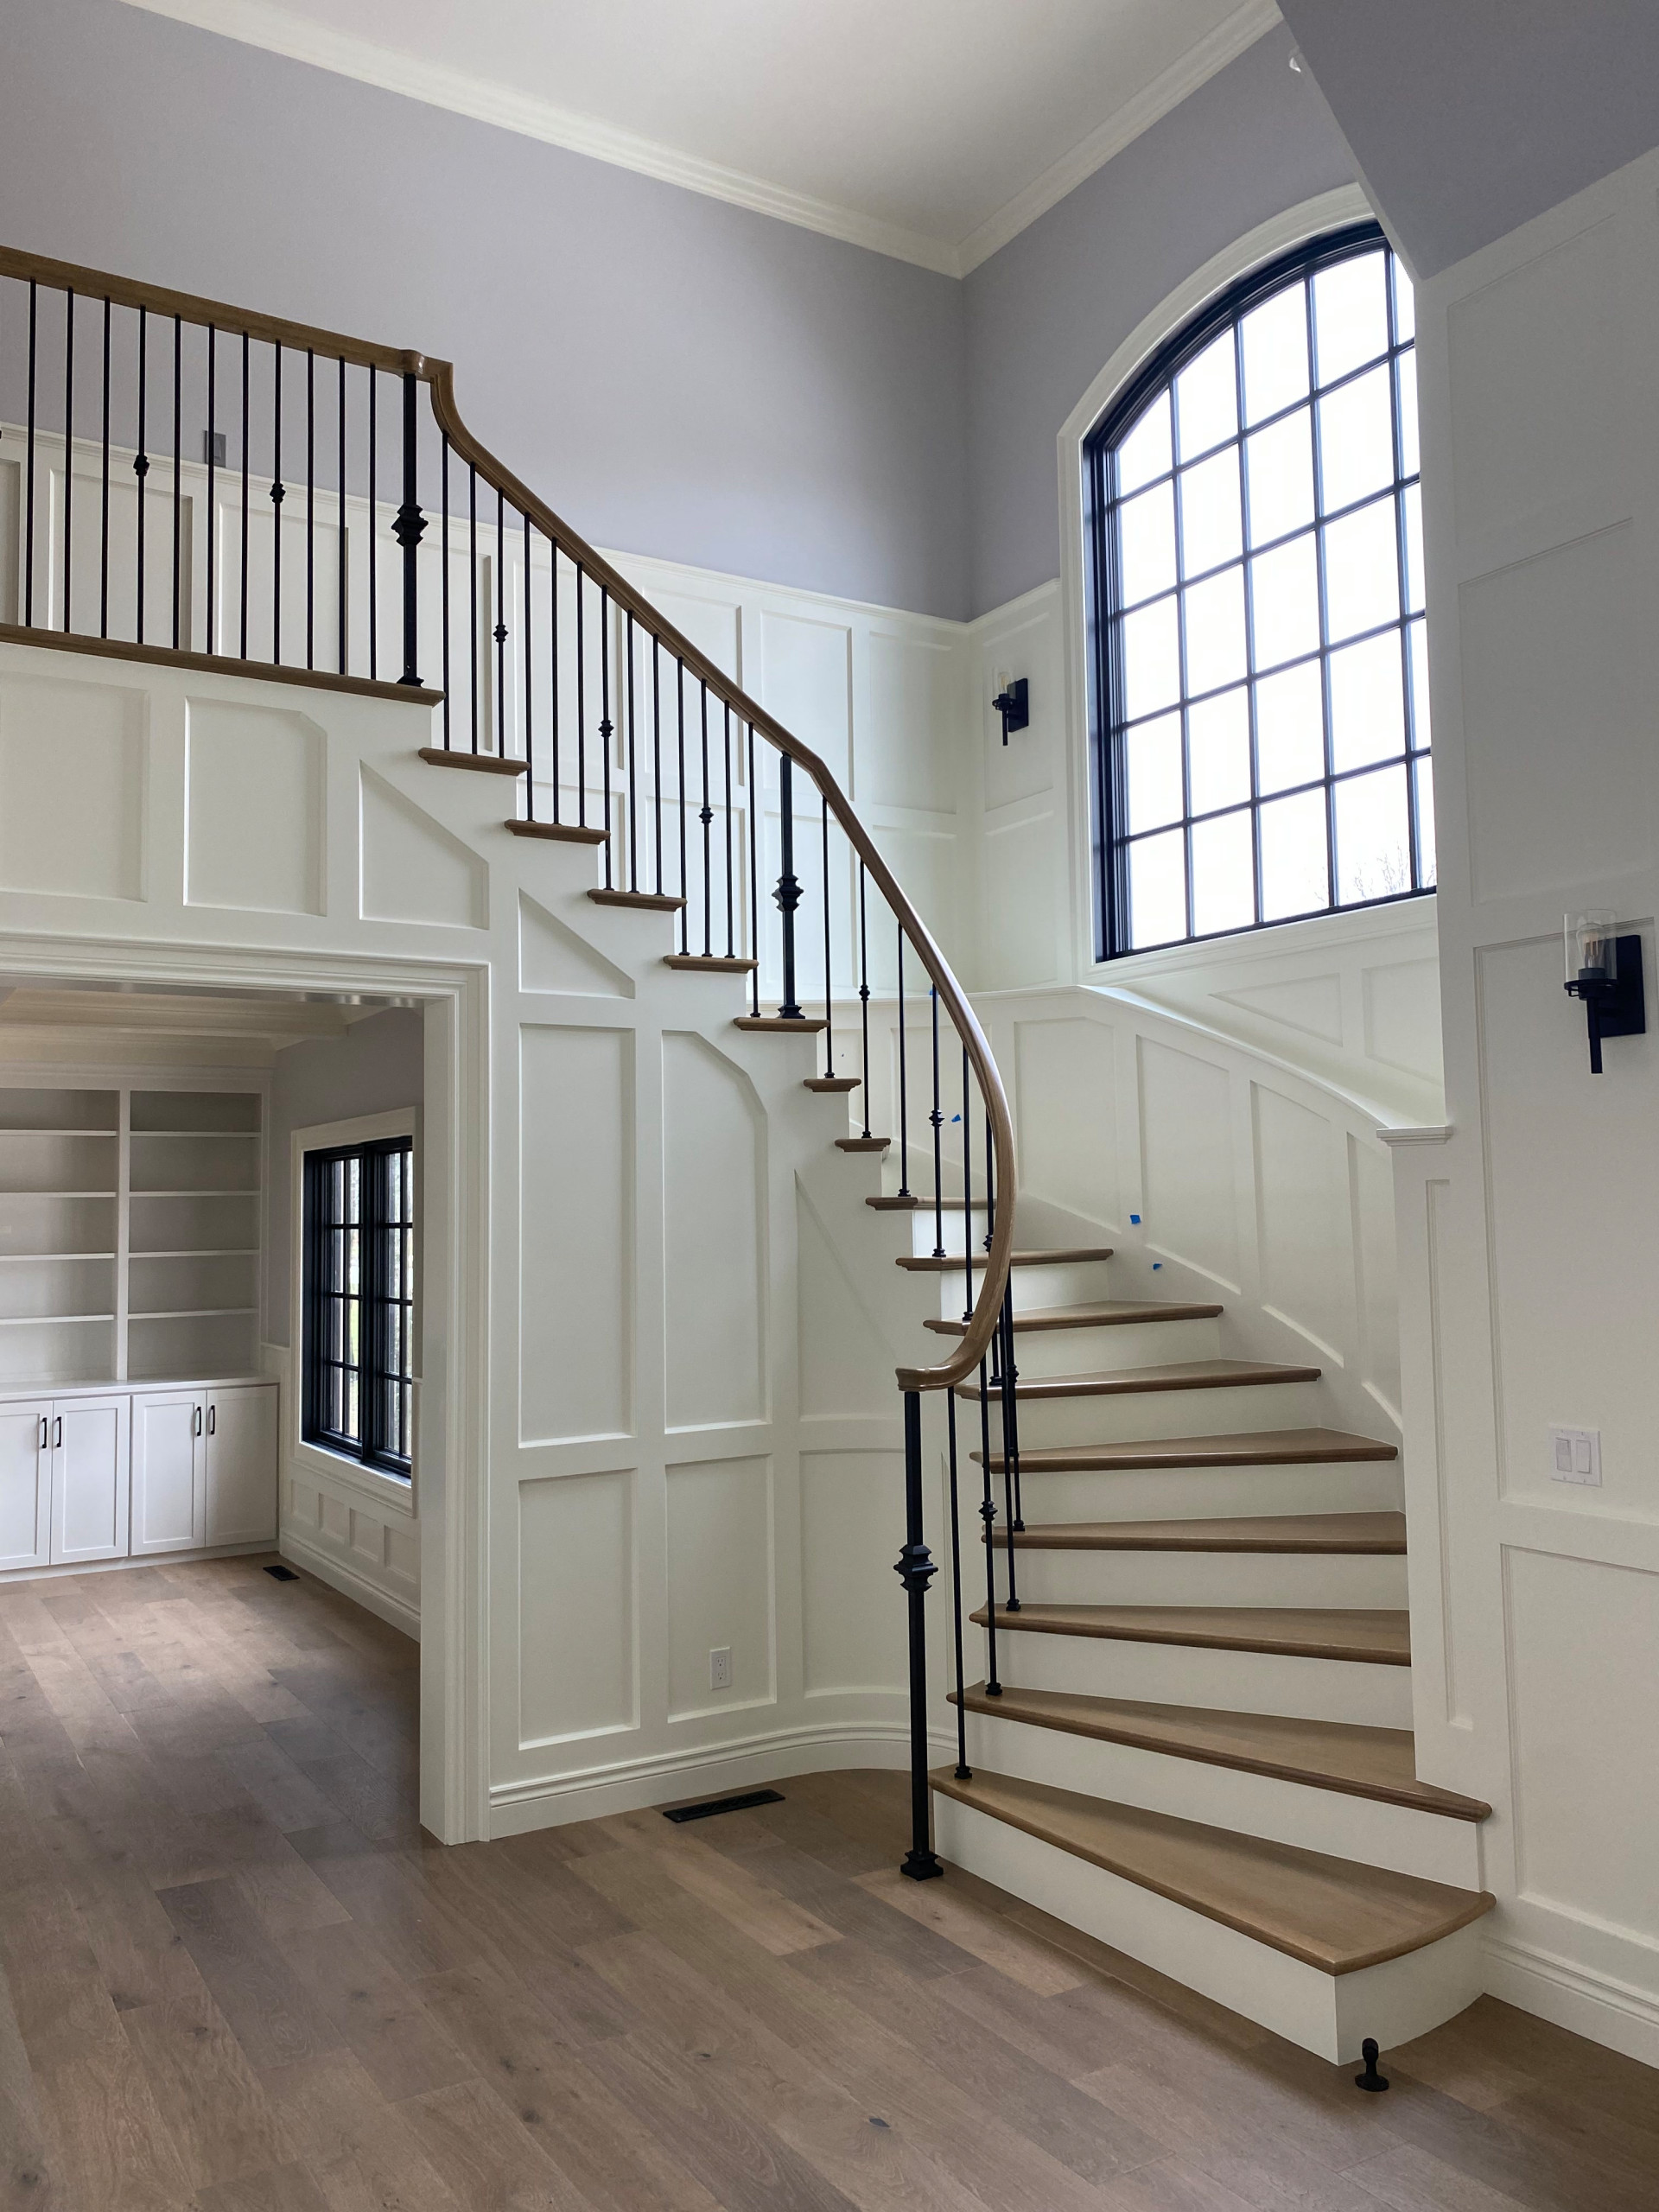 Painted and stained entry staircase with white painted wainscoting